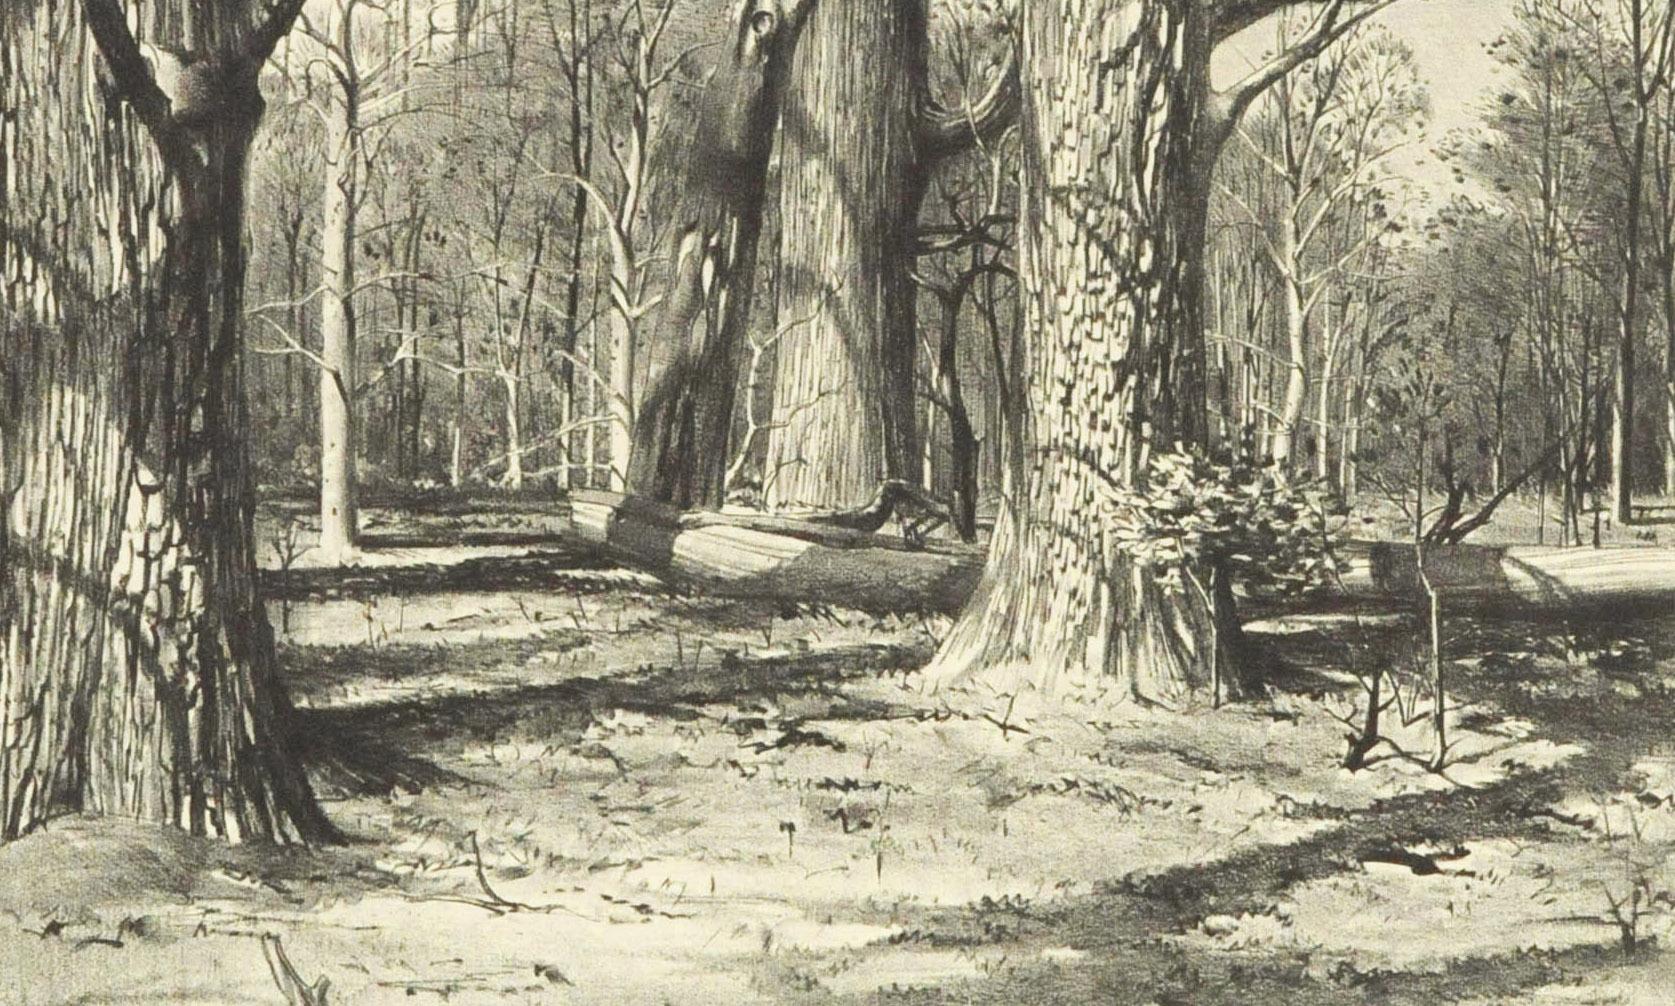 Woodland (New Hope, Pennsylvania) - American Realist Print by Stow Wengenroth